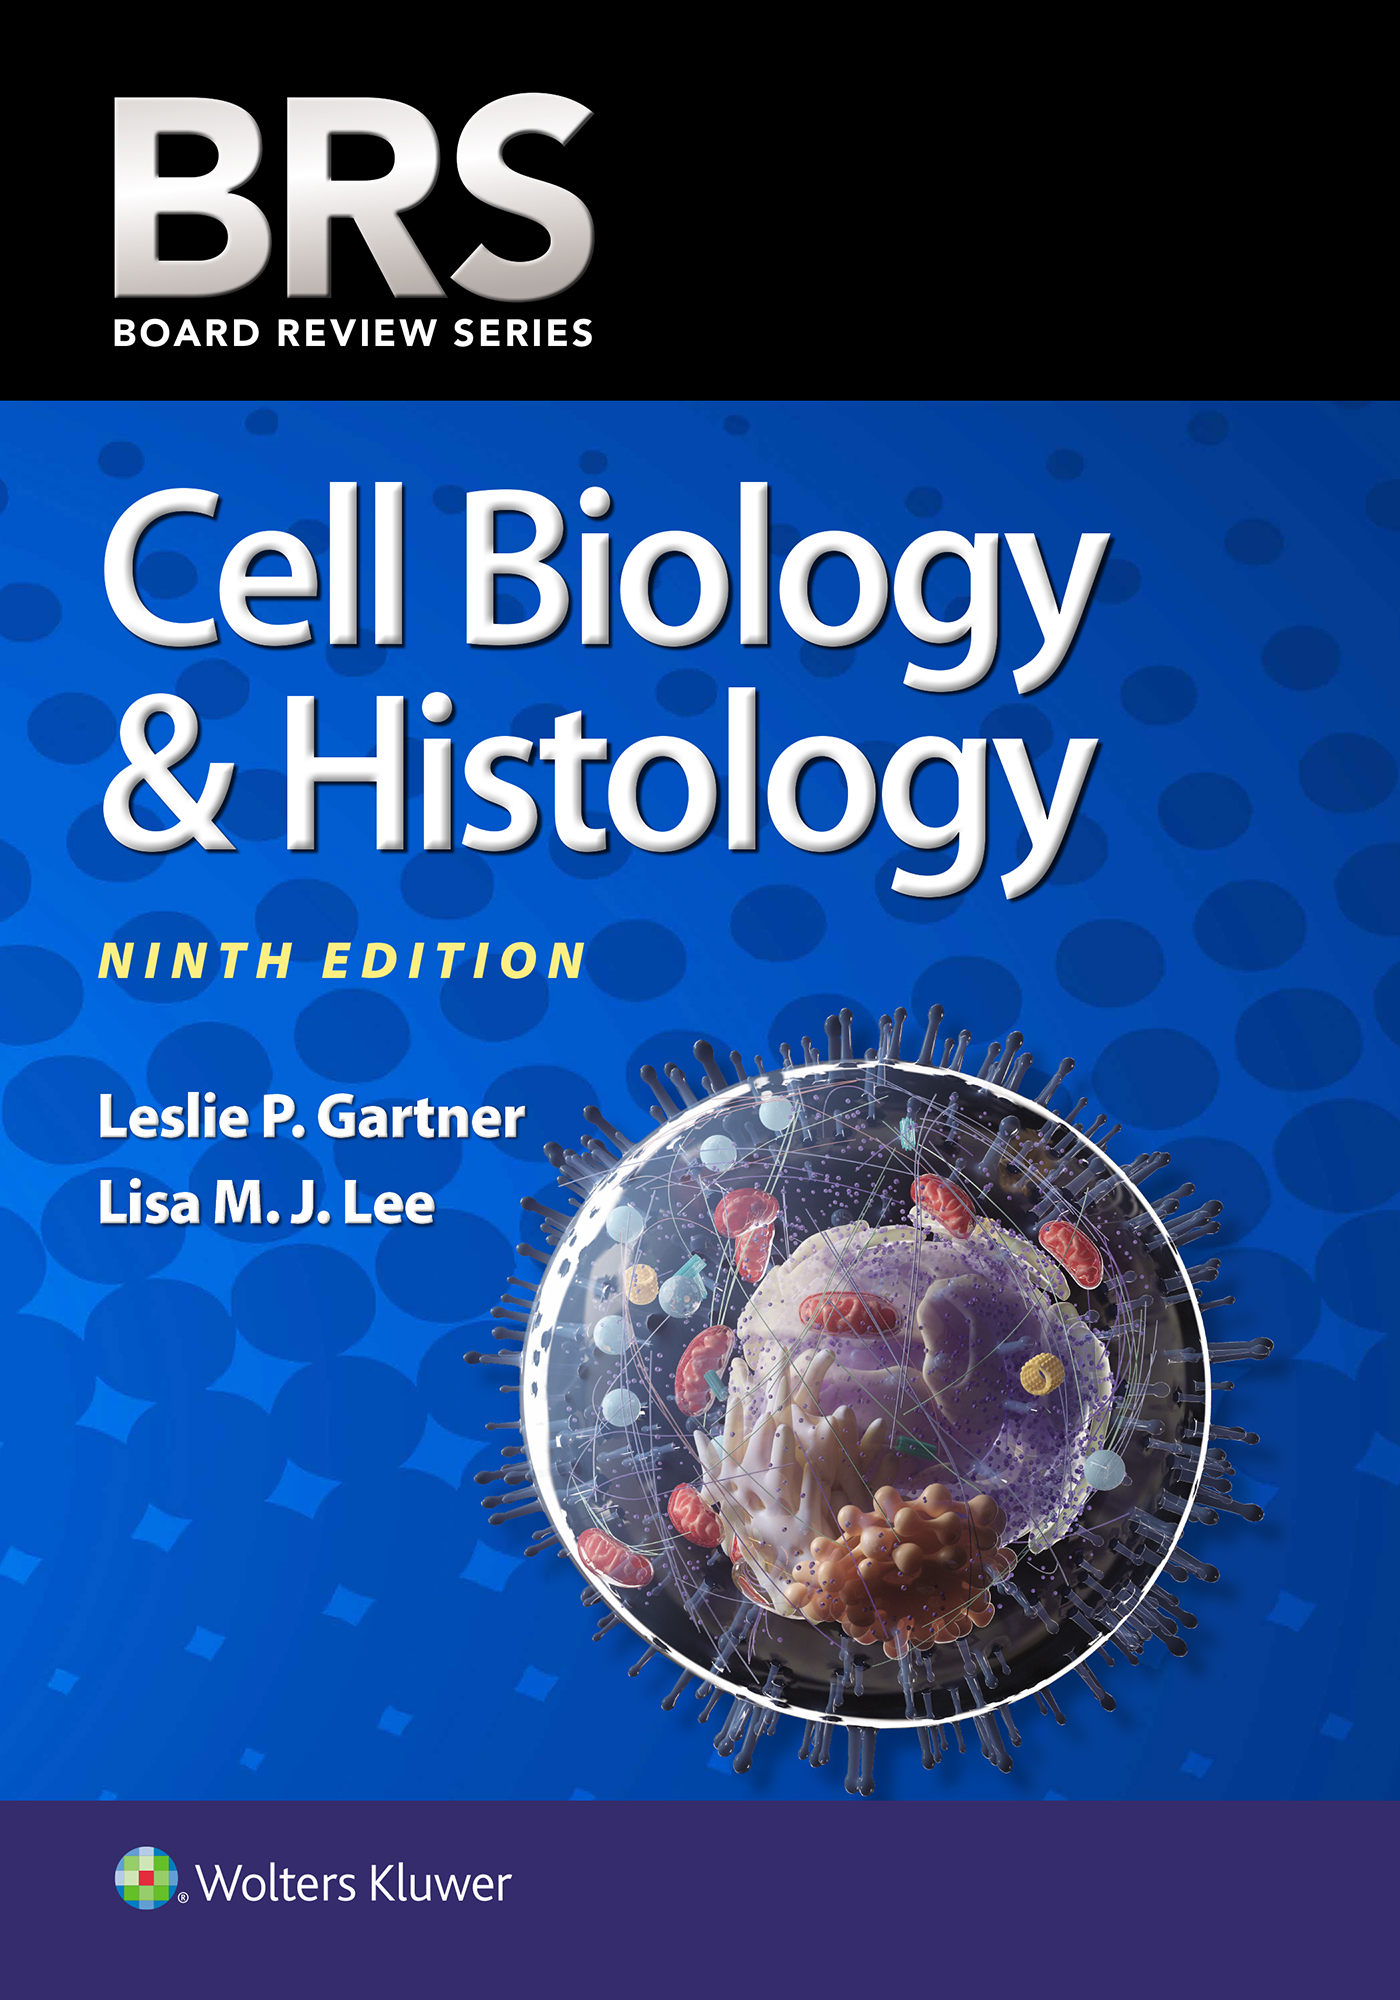 Cell Biology & Histology, 9th ed.(Board Review Series)